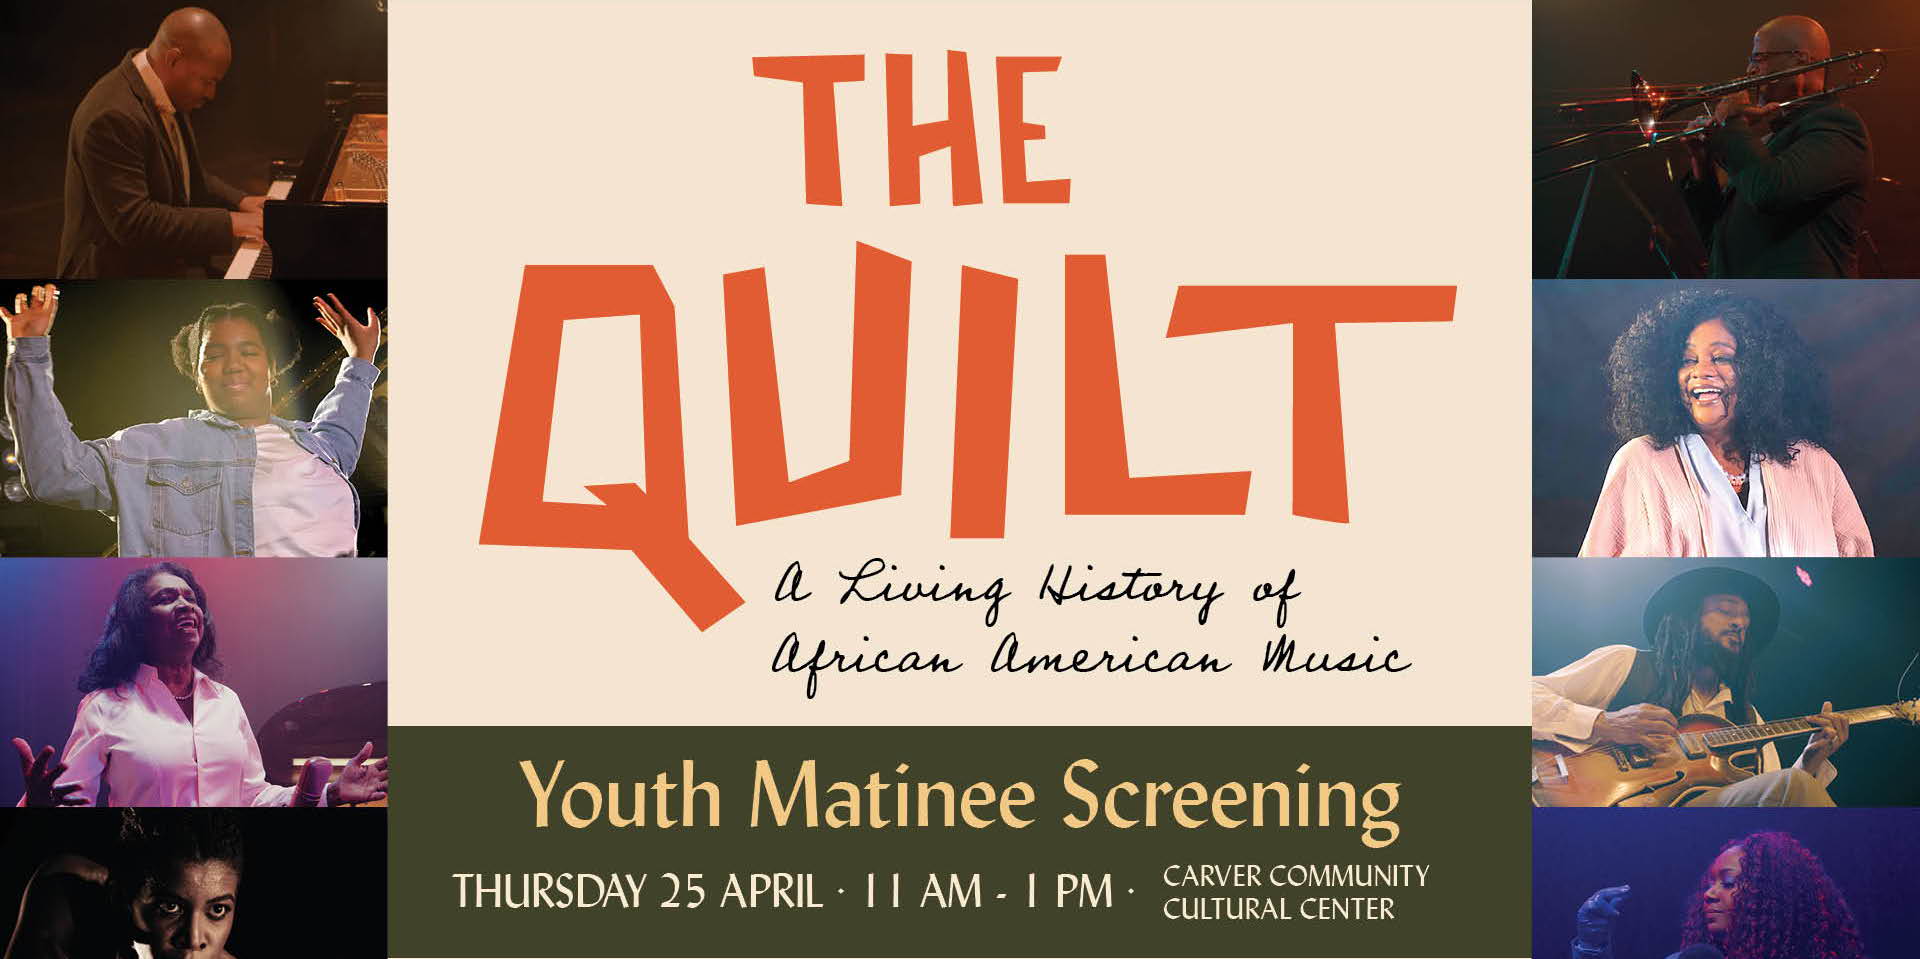 Youth Matinee - The Quilt: A Living History of African American Music promotional image